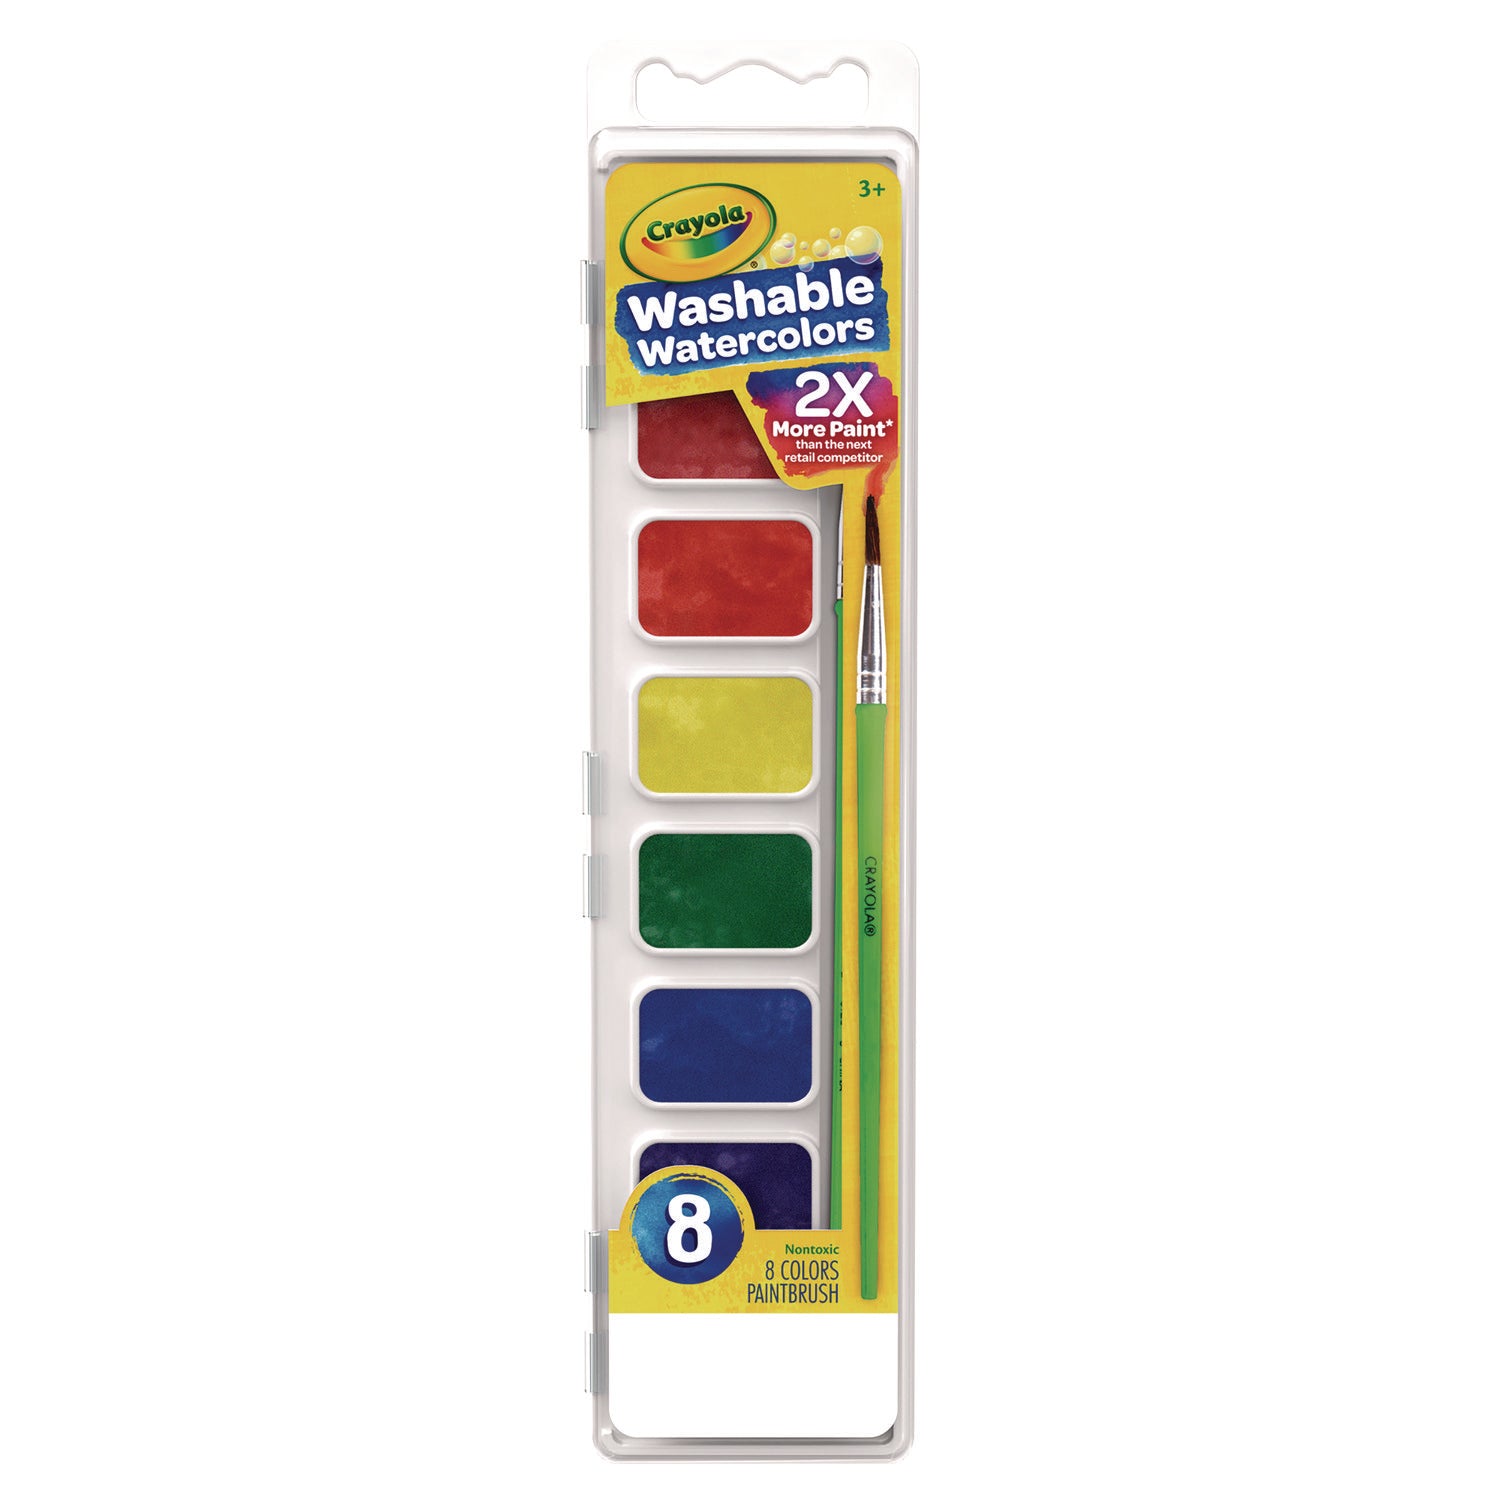 Washable Watercolor Paint, 8 Assorted Colors, Palette Tray - 